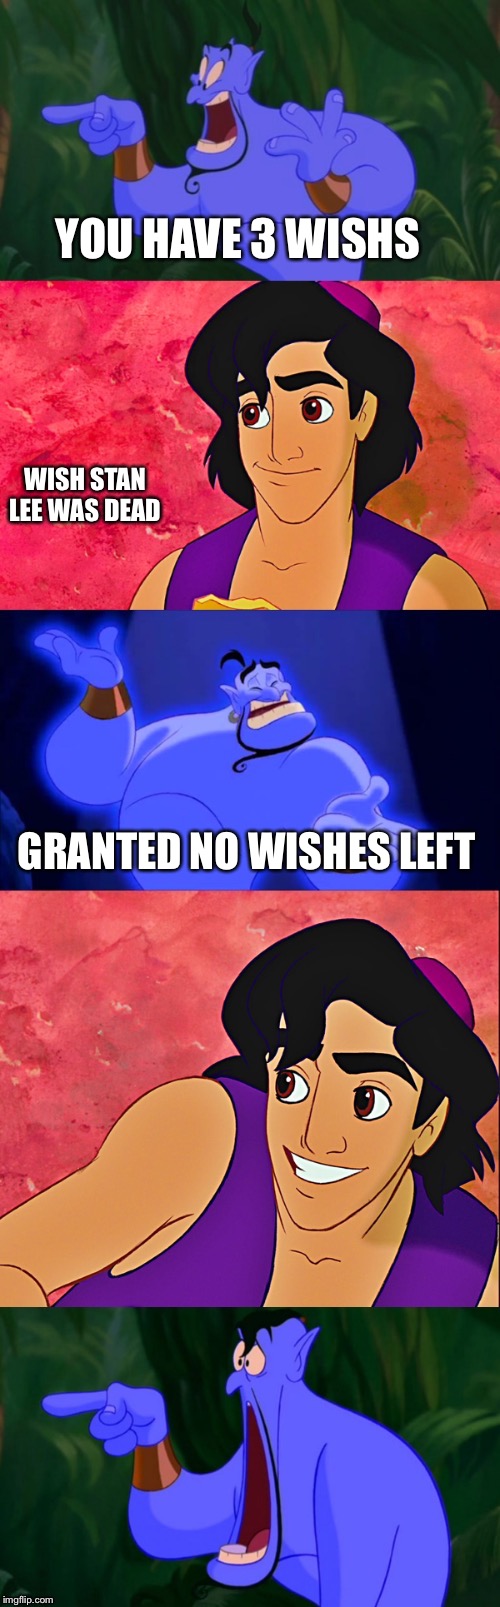 Aladdin and the Genie | YOU HAVE 3 WISHS; WISH STAN LEE WAS DEAD; GRANTED NO WISHES LEFT | image tagged in aladdin and the genie | made w/ Imgflip meme maker